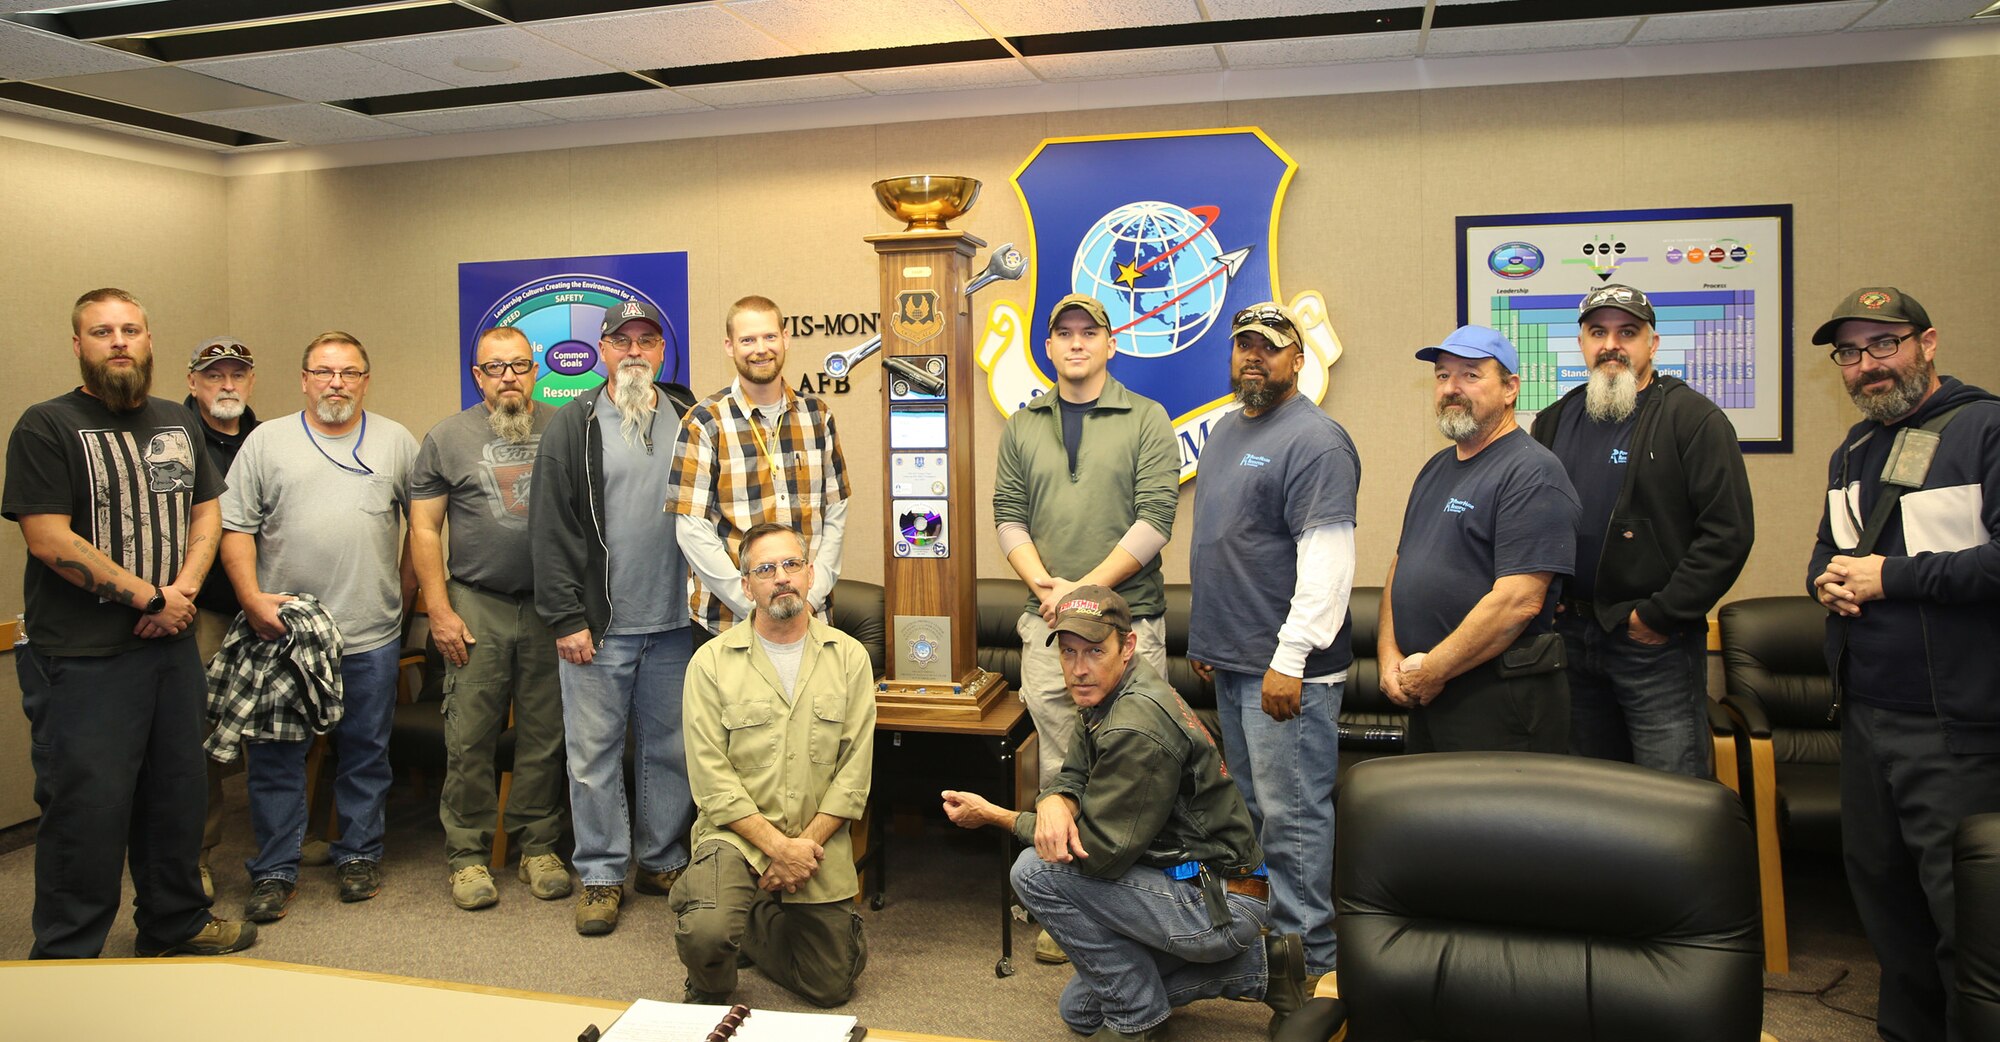 Members of the 309th Support Squadron’s Egress/Air Flight Equipment/Weapons team with the 309th Aerospace and Regeneration Group during the presentation of the L-A-M-P award Nov. 12, 2019, at Davis-Monthan Air Force Base, Arizona. The squadron was recognized for its dedication to safety and maintenance efforts that saved the Department of Defense $500,000.  (U.S. Air Force photo by Terry Pittman)